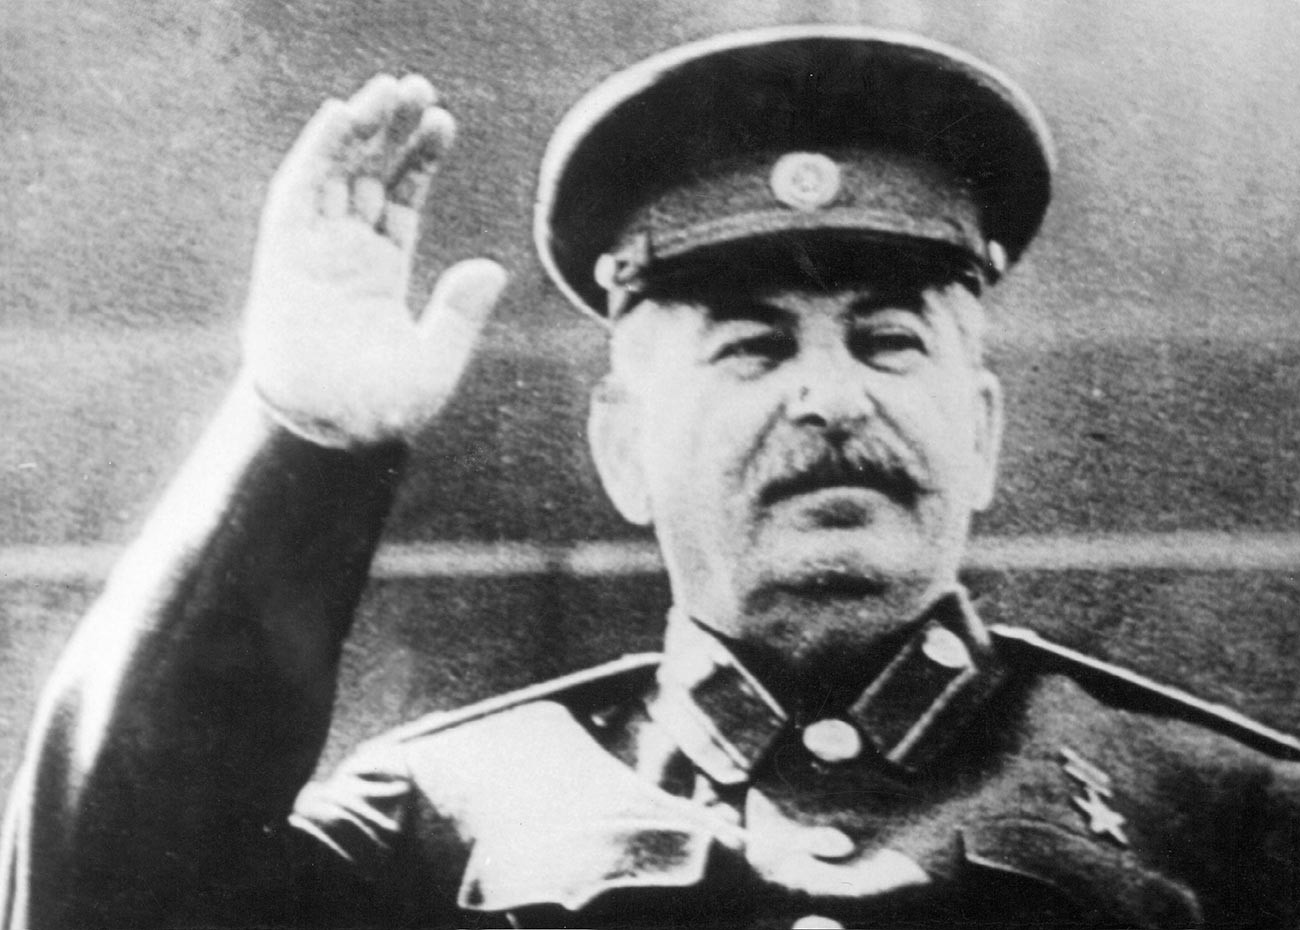 Joseph Stalin on the rostrum of the Lenin's Mausoleum, Moscow